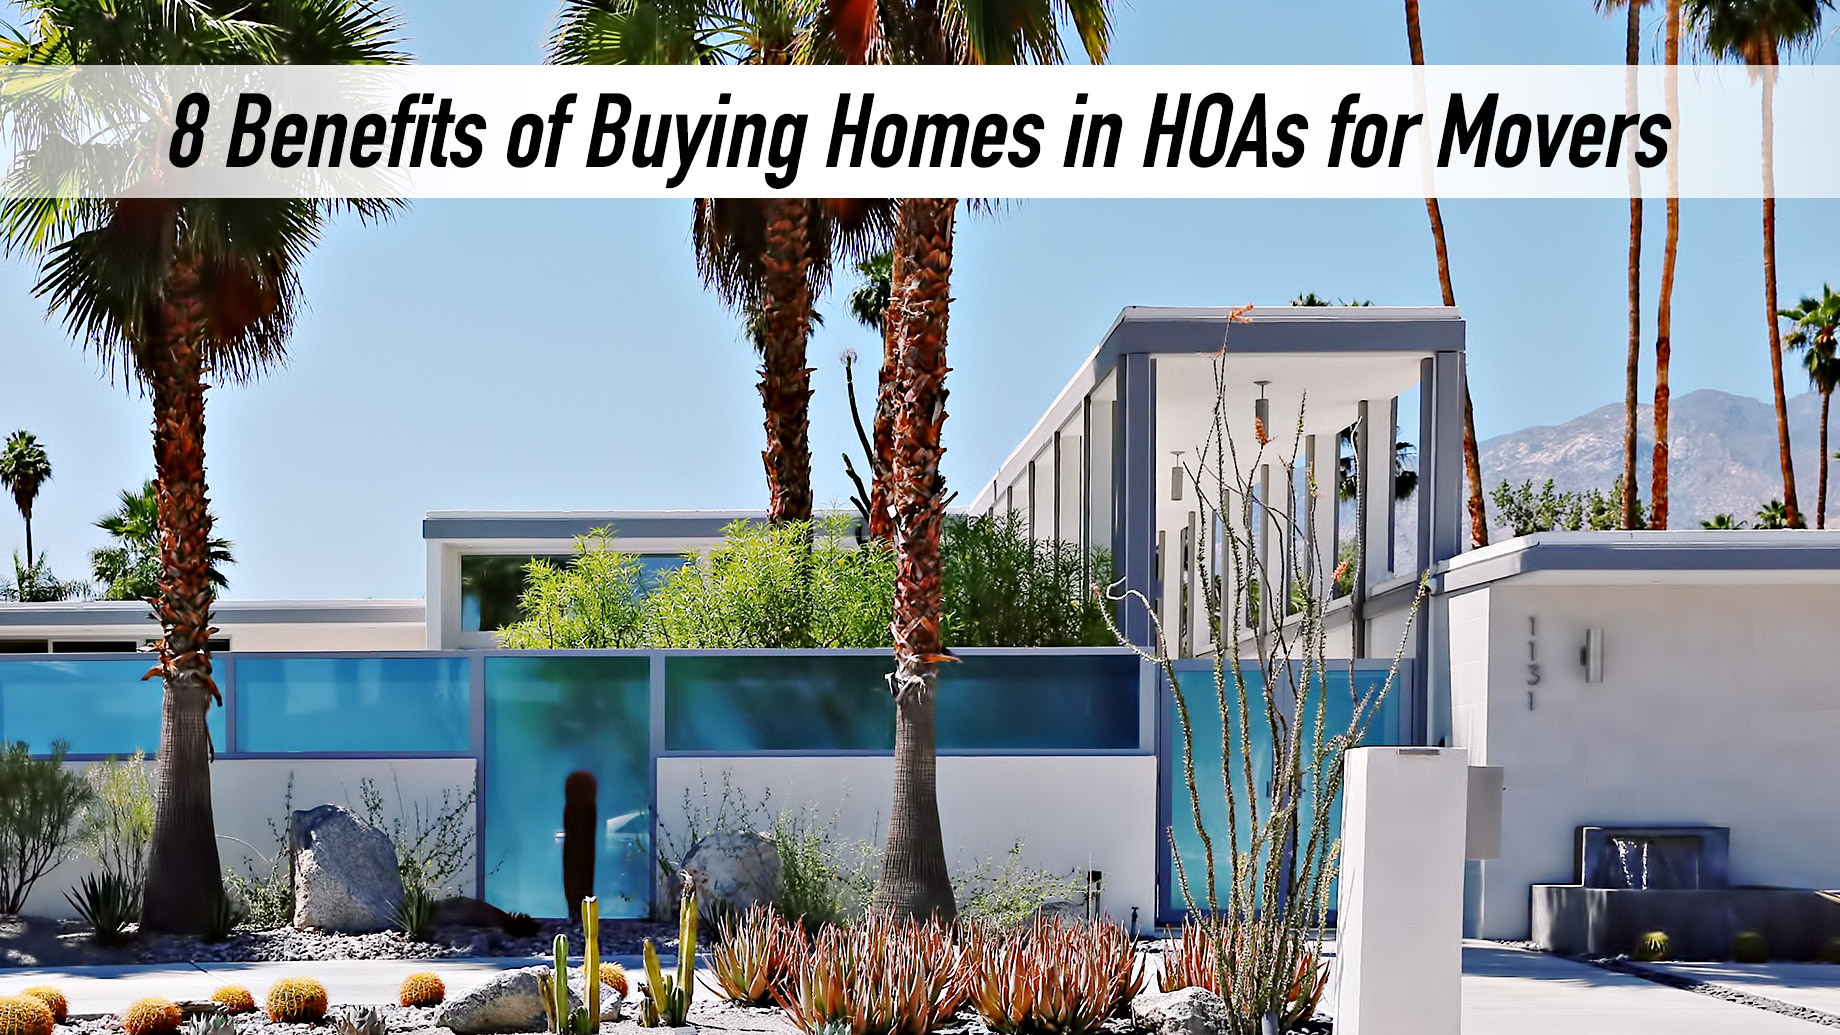 8 Benefits of Buying Homes in HOAs for Movers